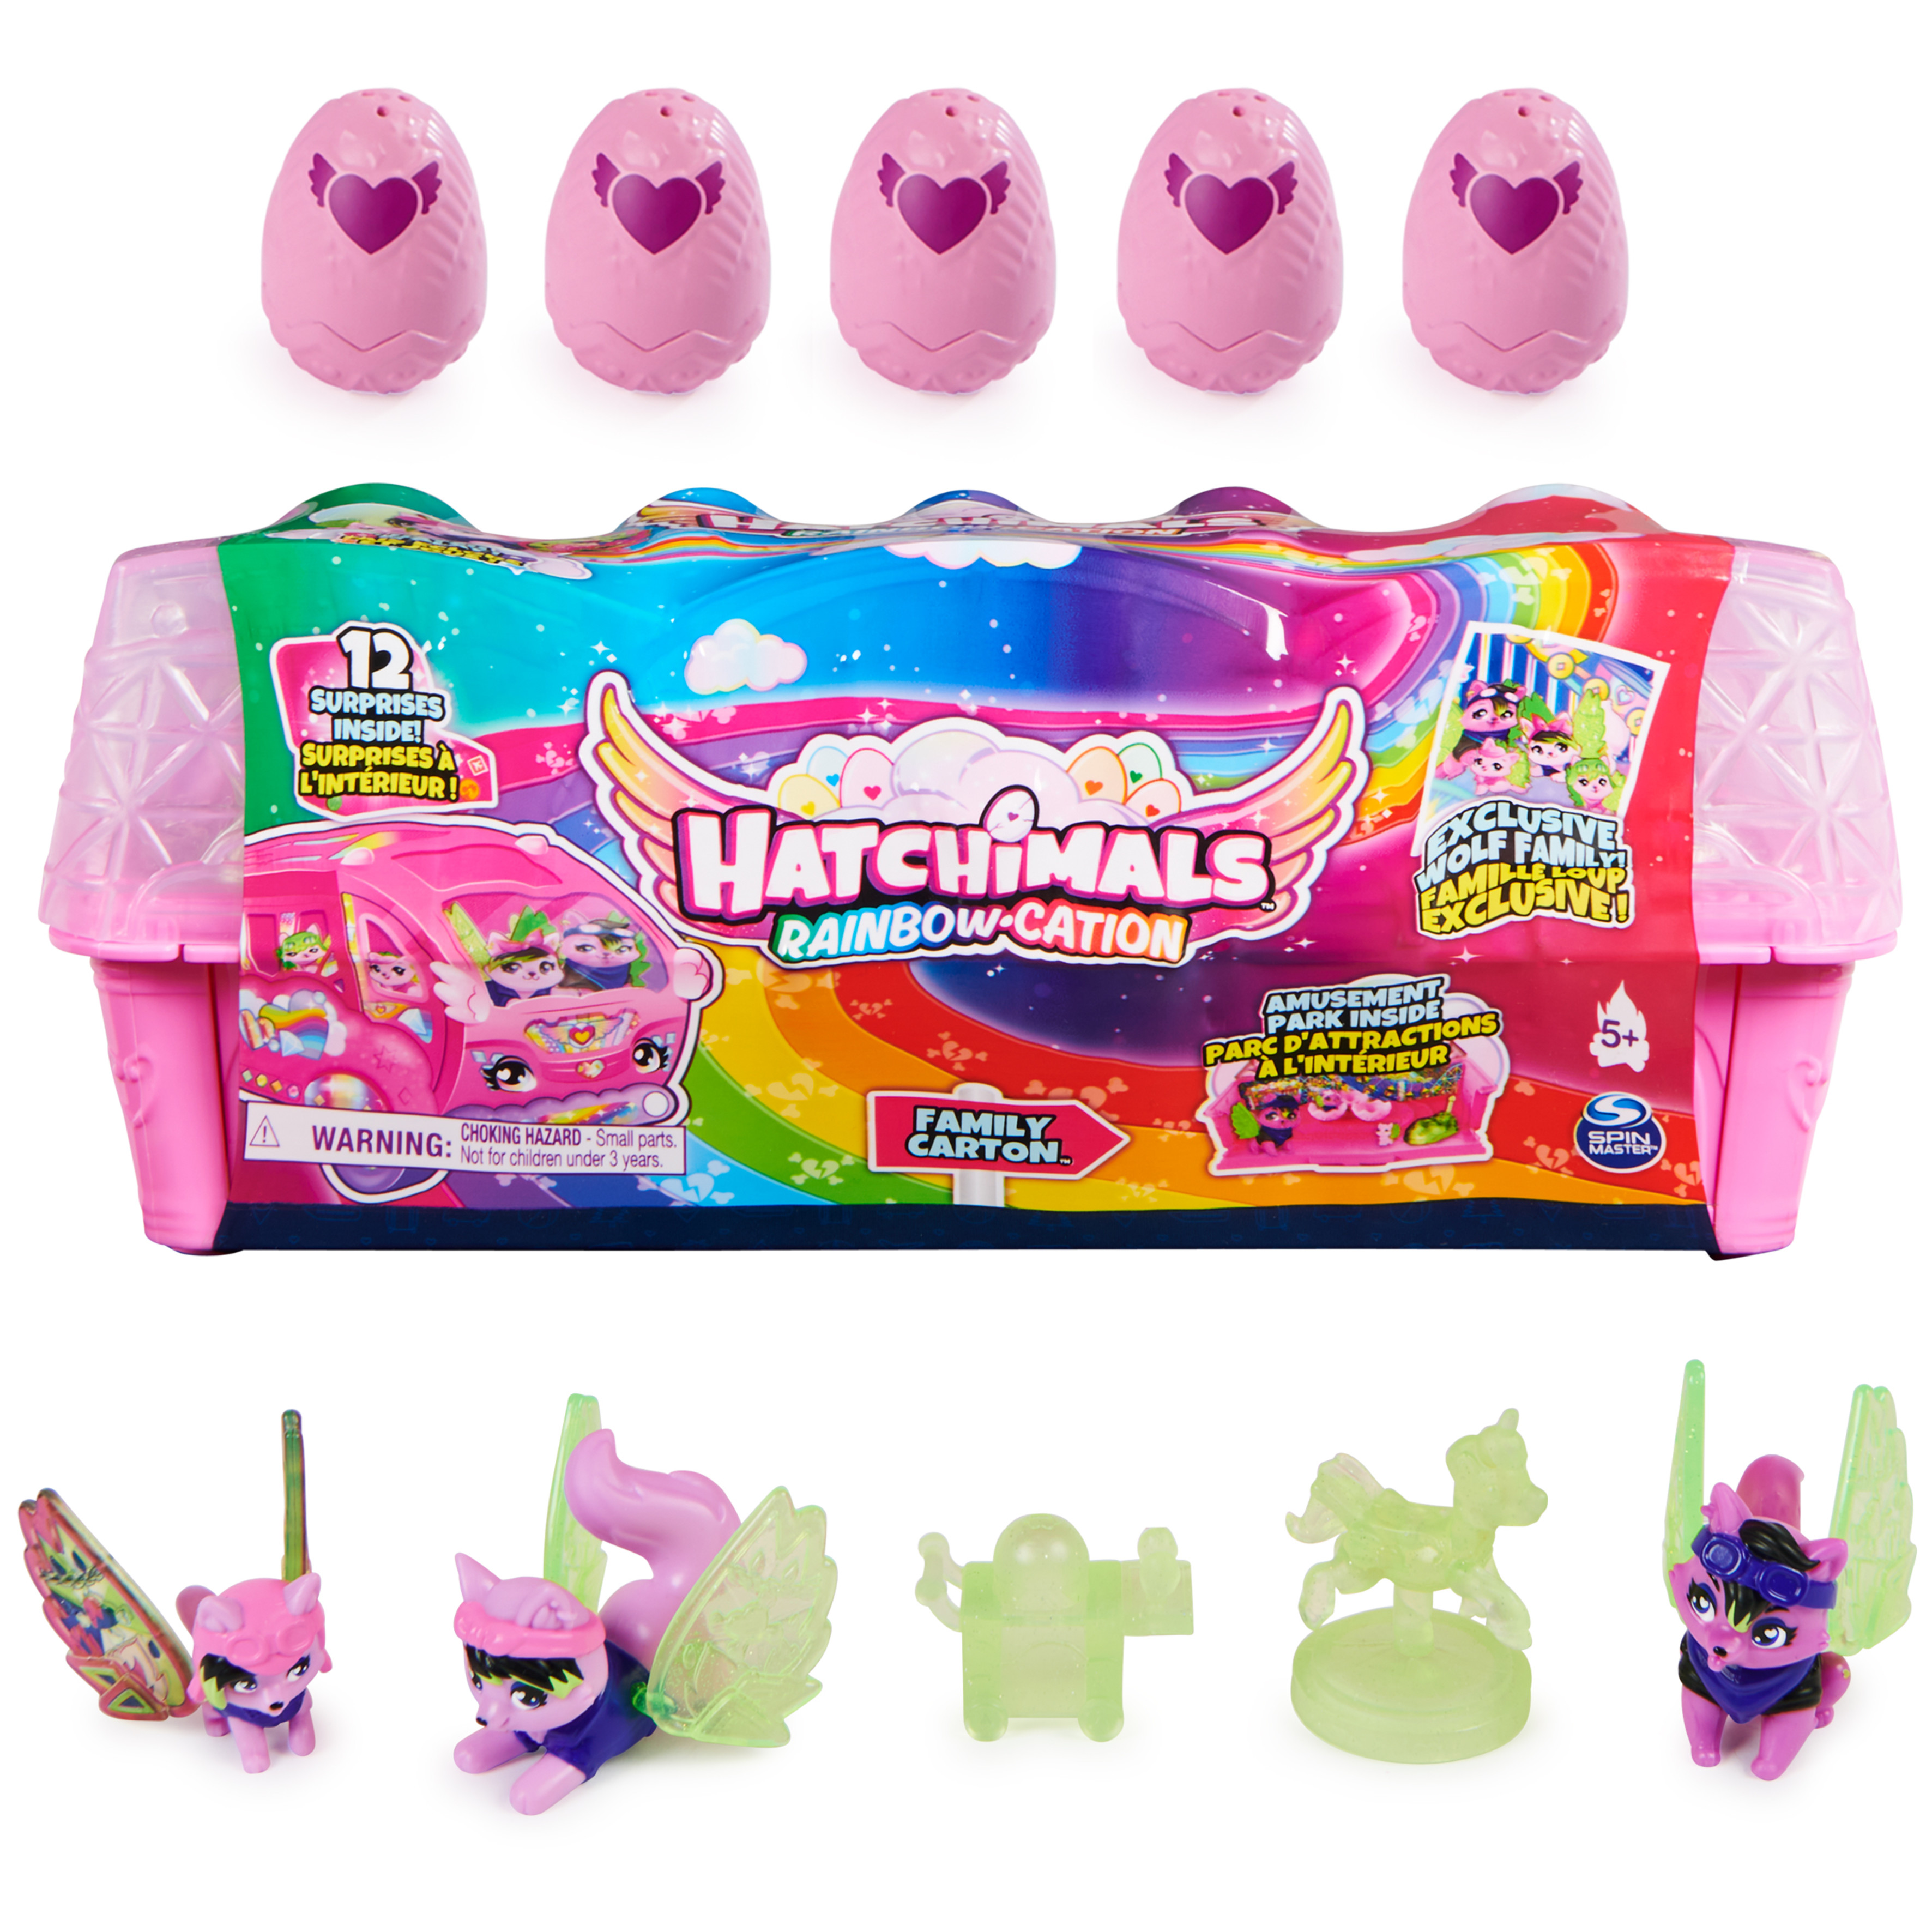 Hatchimals CollEGGtibles Wolf Family Carton with Surprise Playset - image 1 of 10